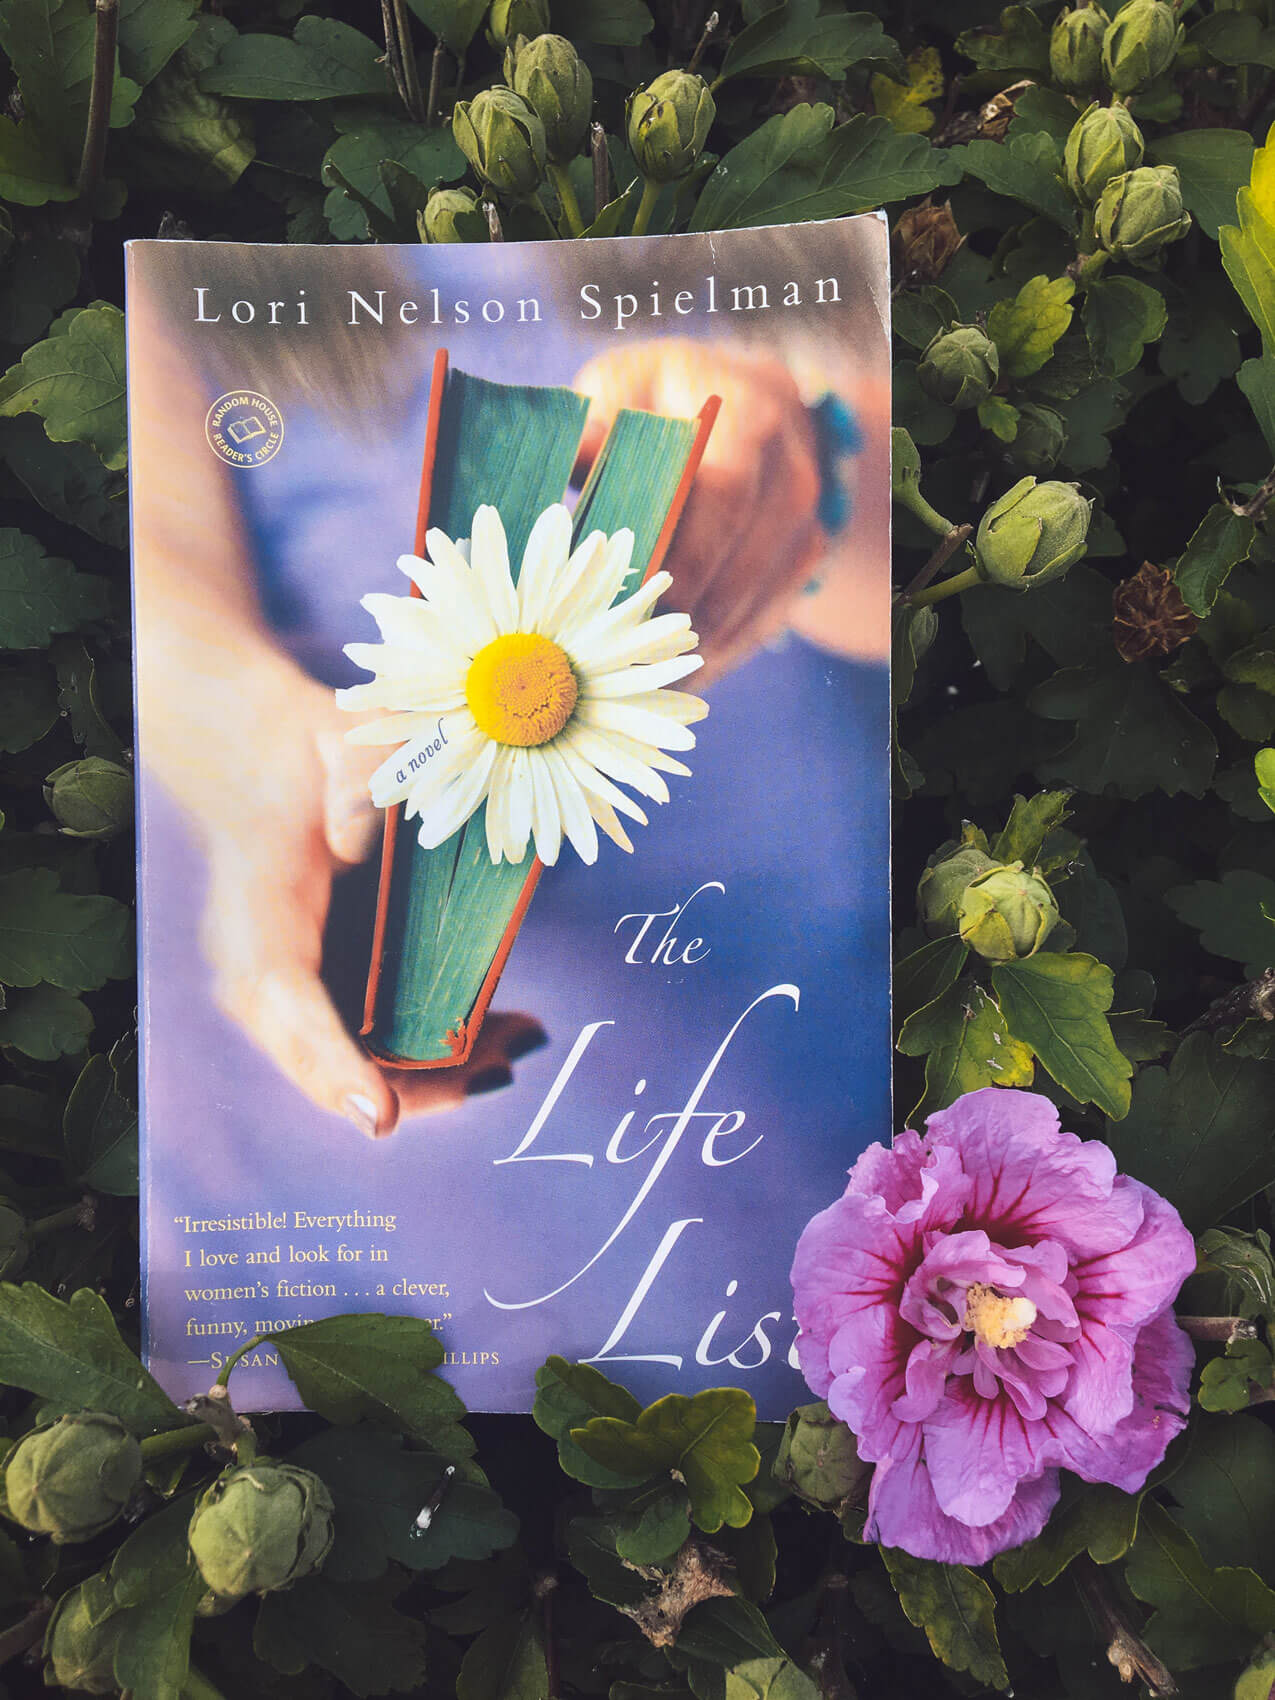 Searching for an inspirational fiction read about following your heart? You won't want to miss The Life List by Lori Nelson Spielman. Learn why I loved the book inside my review here. #inspiringbooks #inspiringreads #booklover #bookrecommendations #inspiration #followyourheart #trueself #consciousliving #spiritualawakening #fictionreads